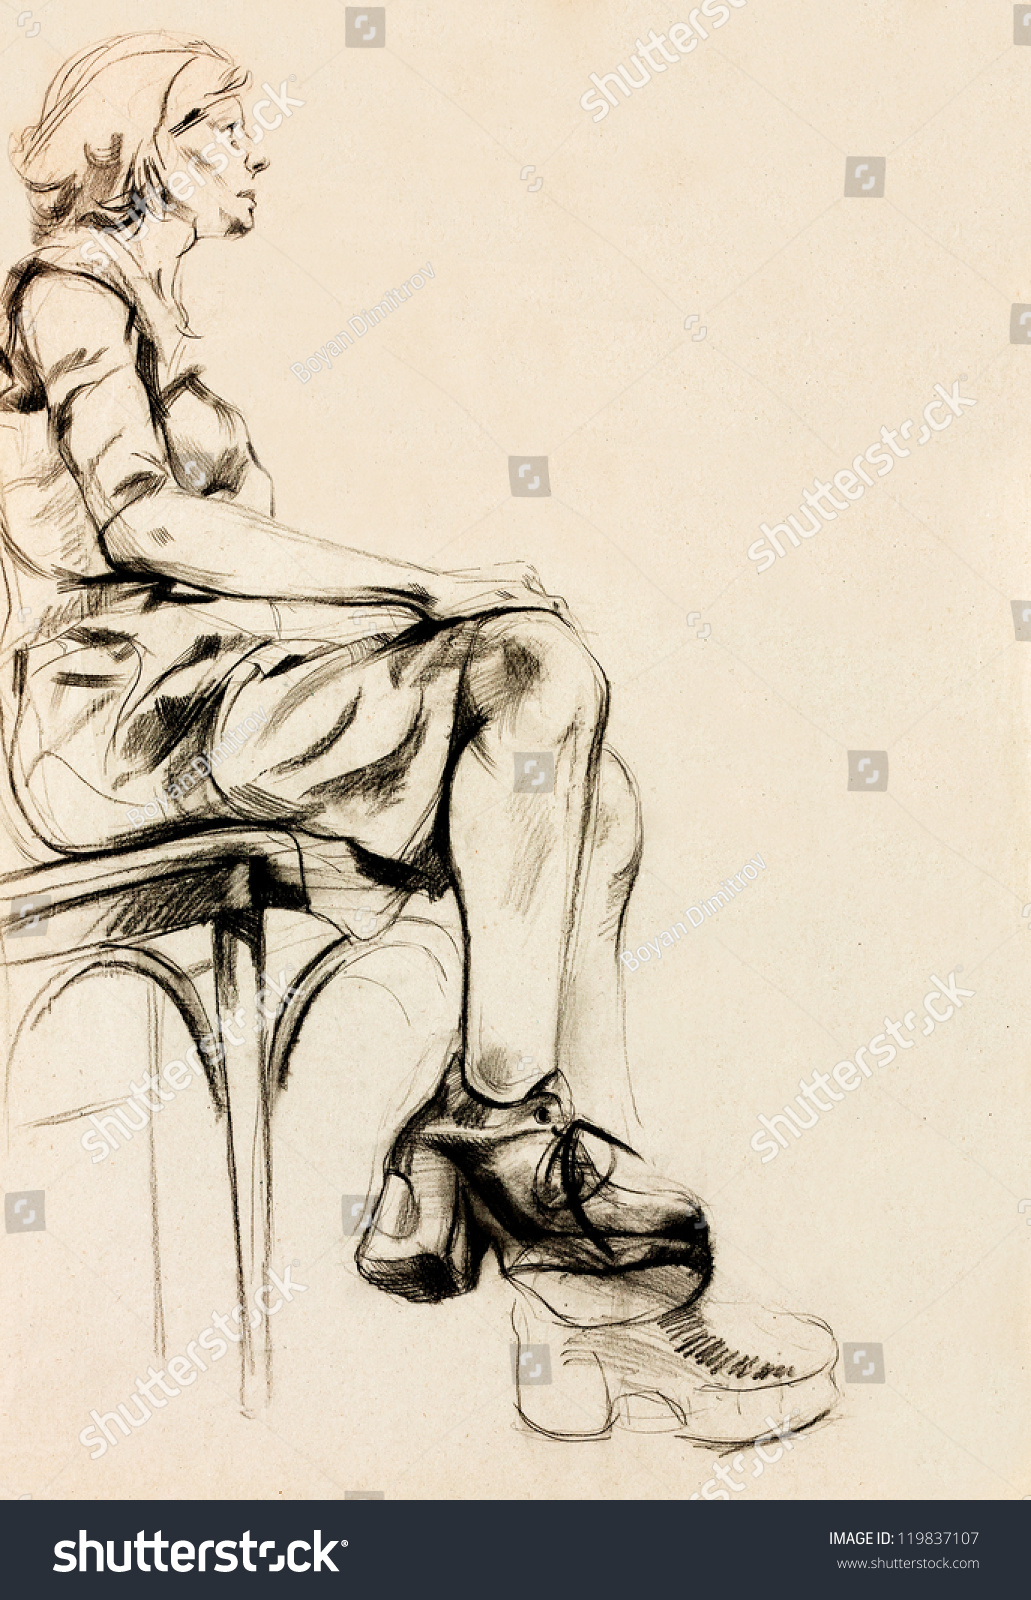 Original Pencil Drawing Charcoal Hand Drawn Stock Illustration 119837107 The spread legs pose, whether squatting or sitting is one of the most difficult to get right. https www shutterstock com image illustration original pencil drawing charcoal hand drawn 119837107